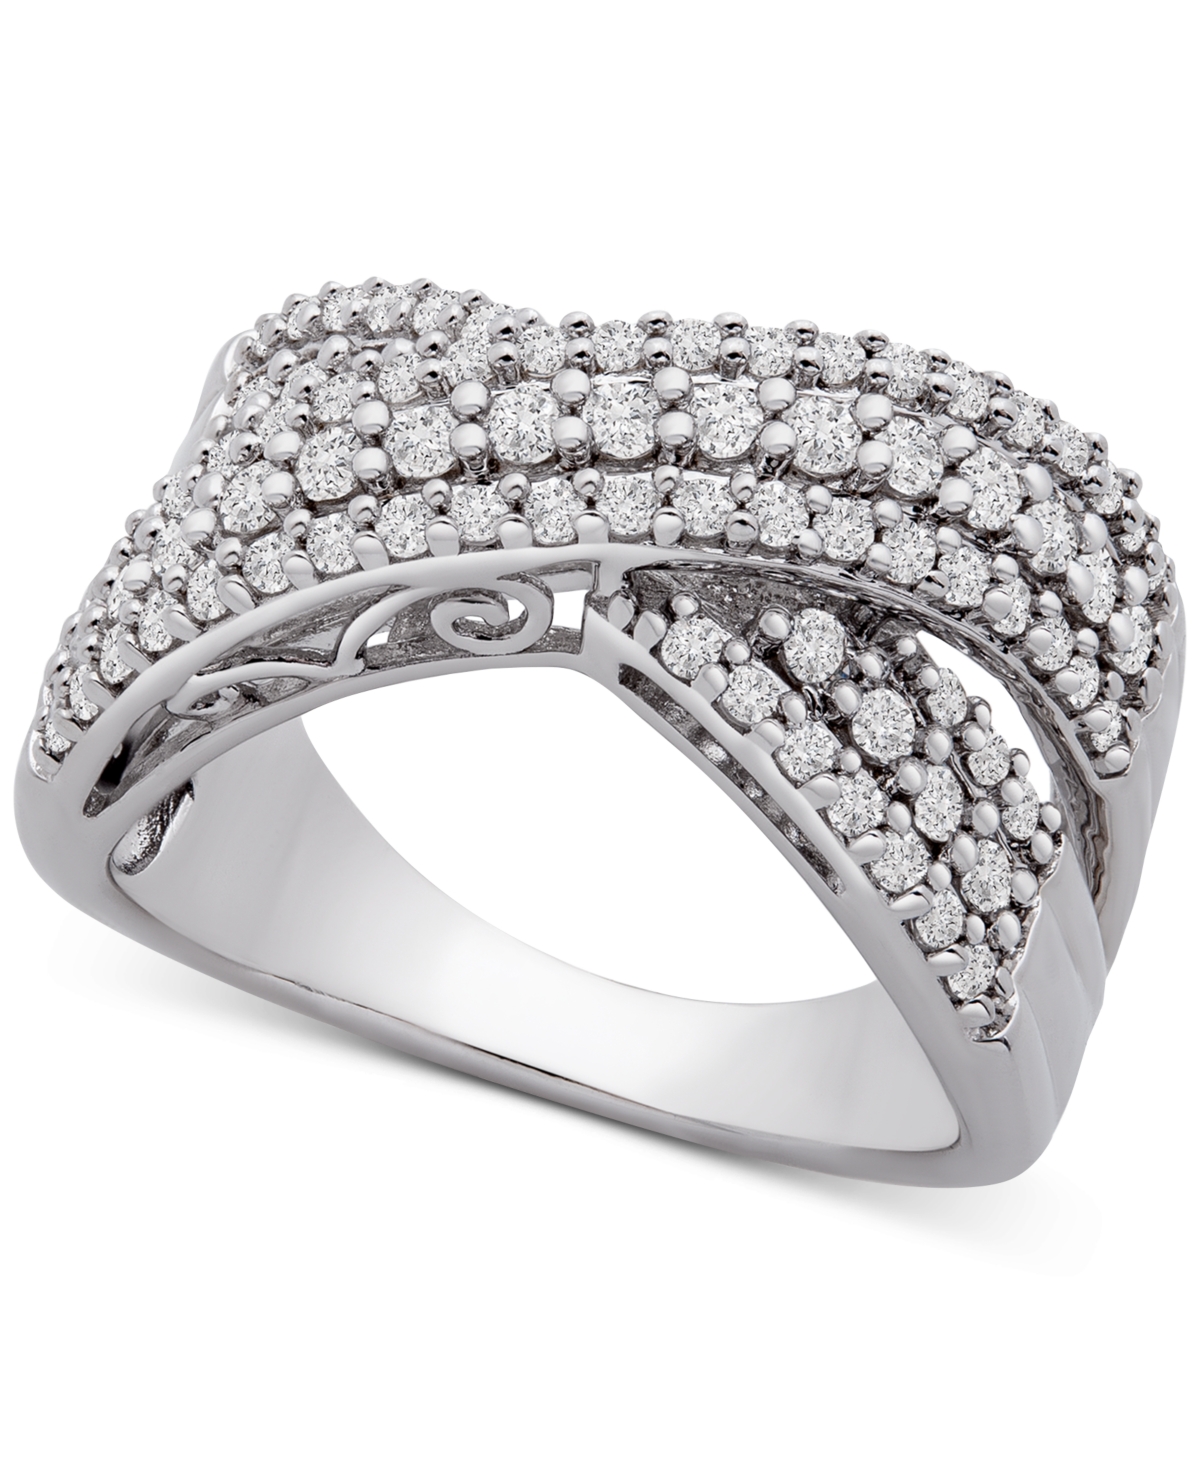 Diamond Crossover Statement Ring (1 ct. t.w.) in Sterling Silver - Sterling Silver